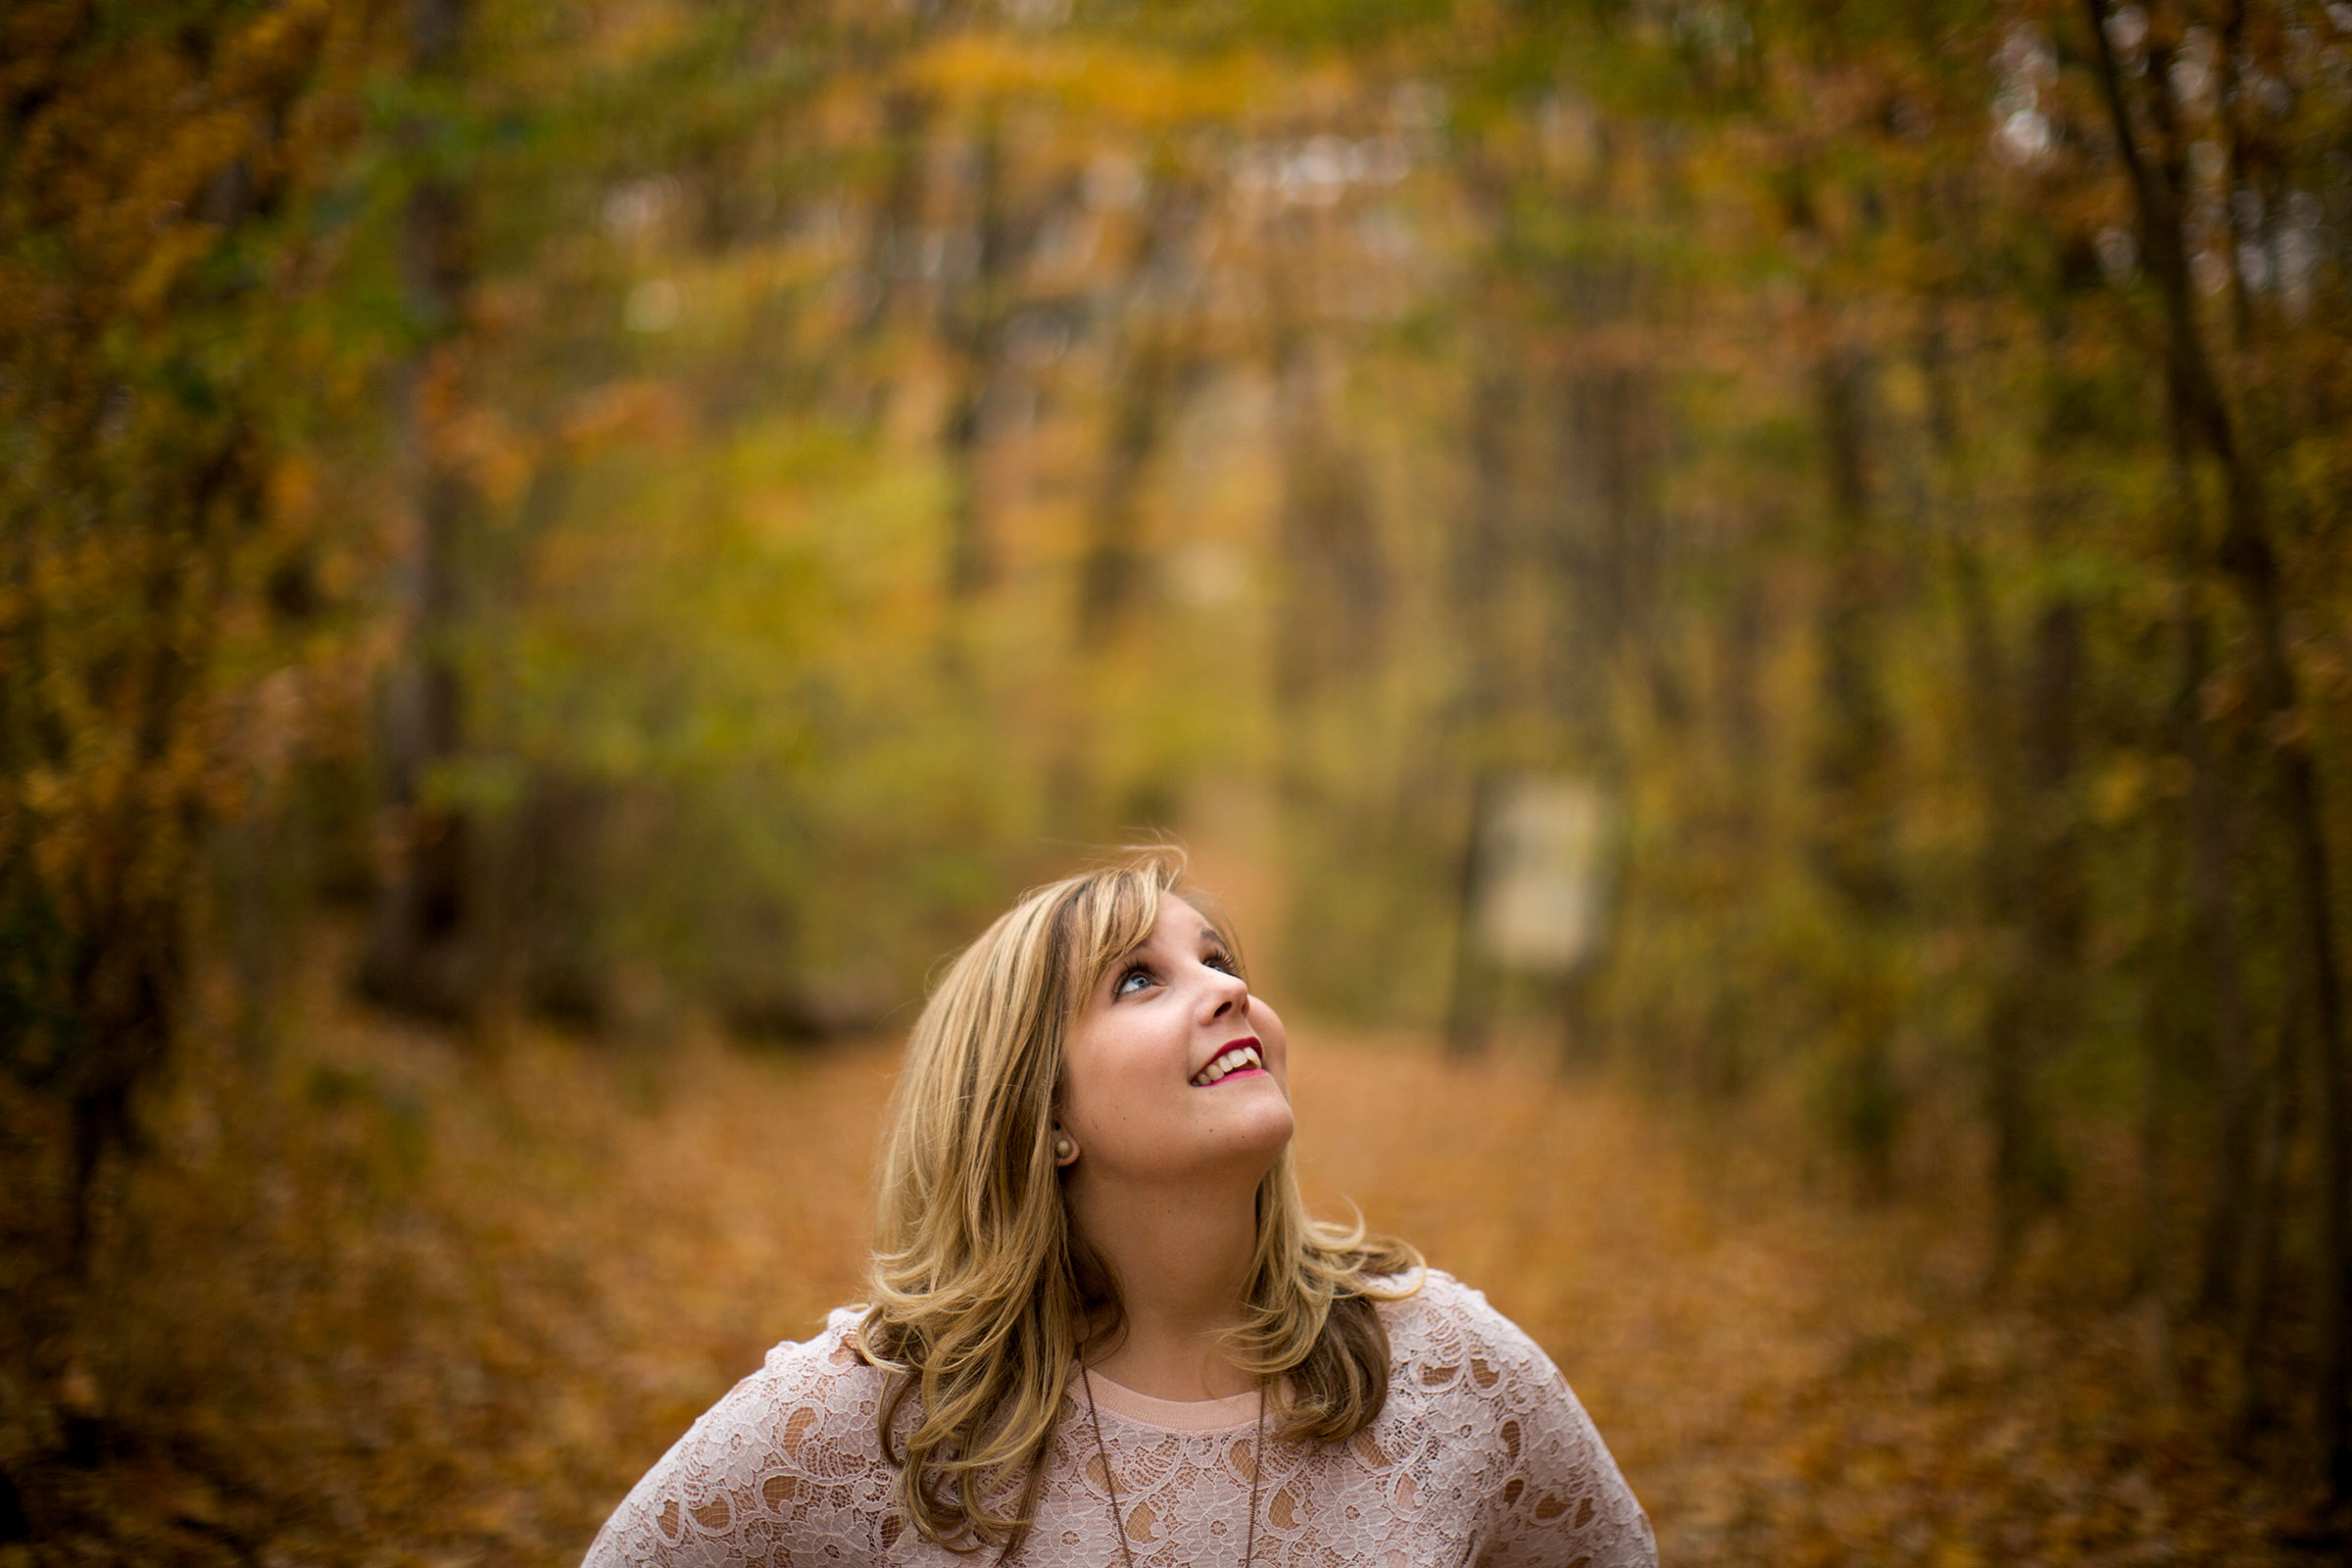 Barbara Brosher poses for a photo on Saturday, Oct. 24, 2015, near Bloomington, Indiana. (Photo by James Brosher)